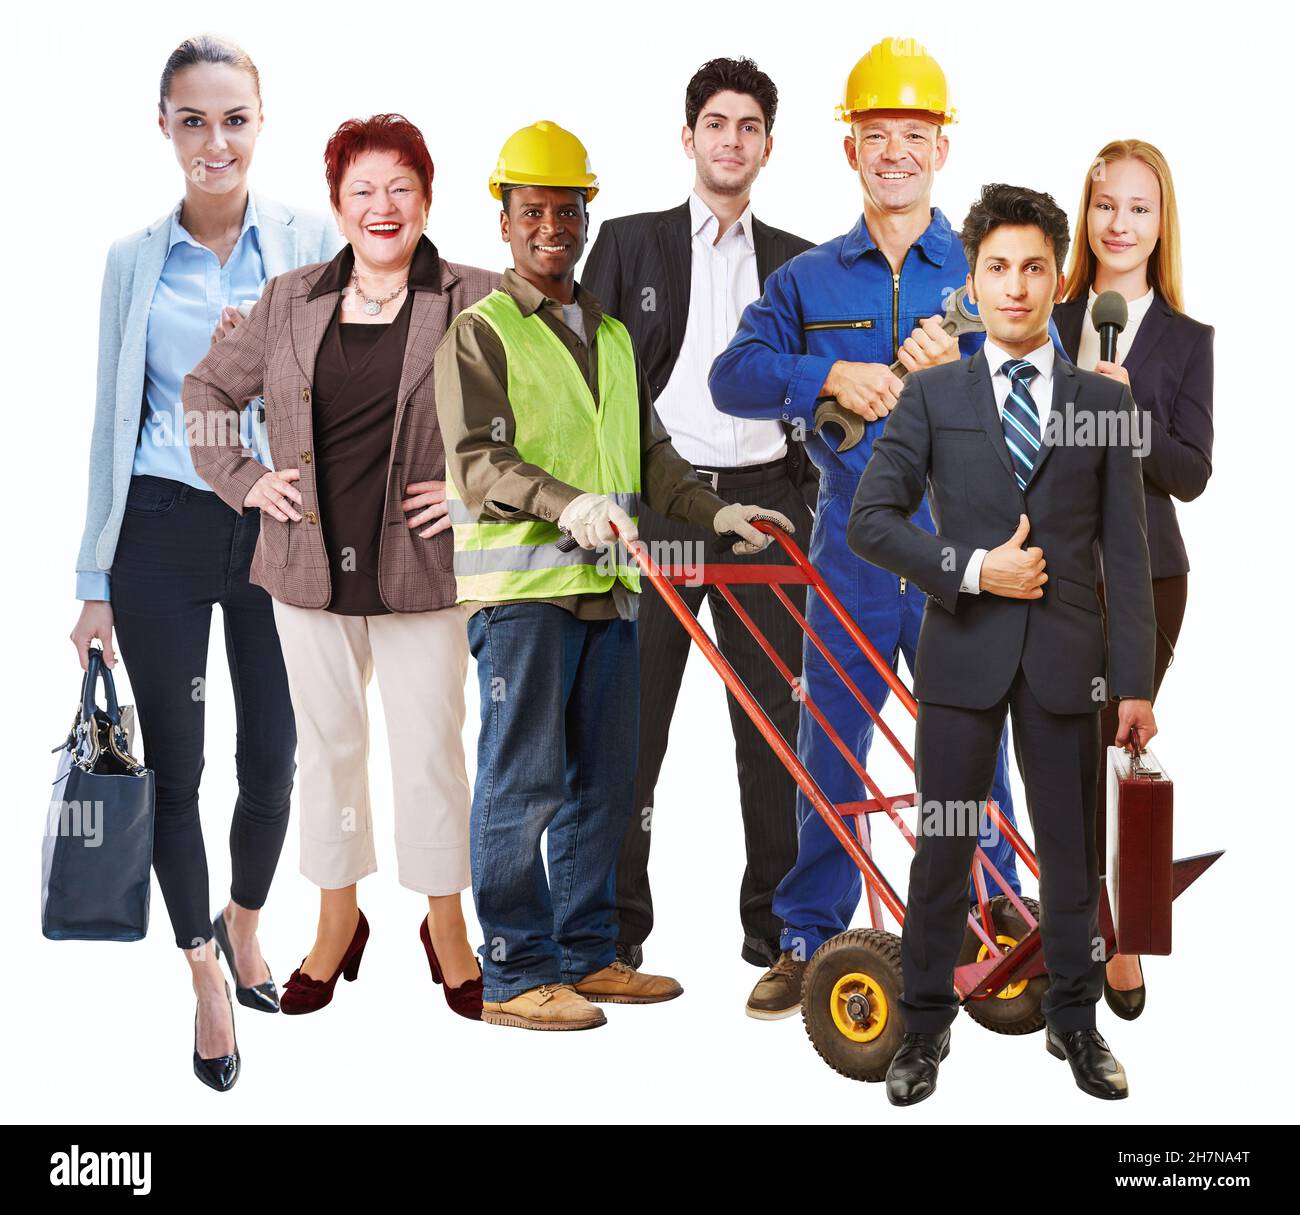 Group of people from different professions as a job market concept Stock Photo